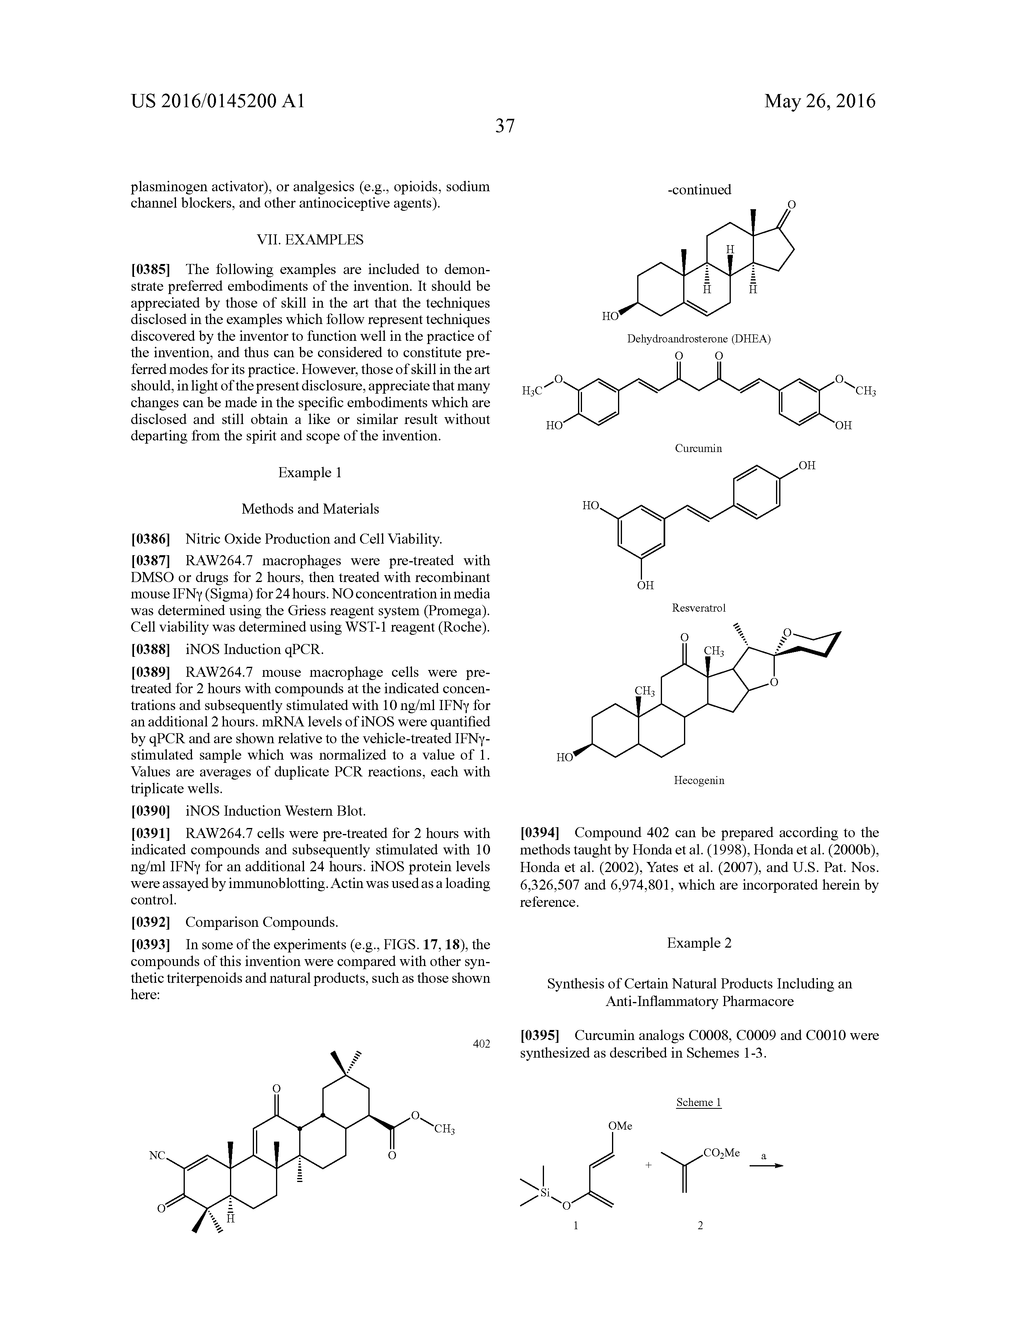 NATURAL PRODUCT ANALOGS INCLUDING AN ANTI-INFLAMMATORY CYANOENONE     PHARMACORE AND METHODS OF USE - diagram, schematic, and image 62